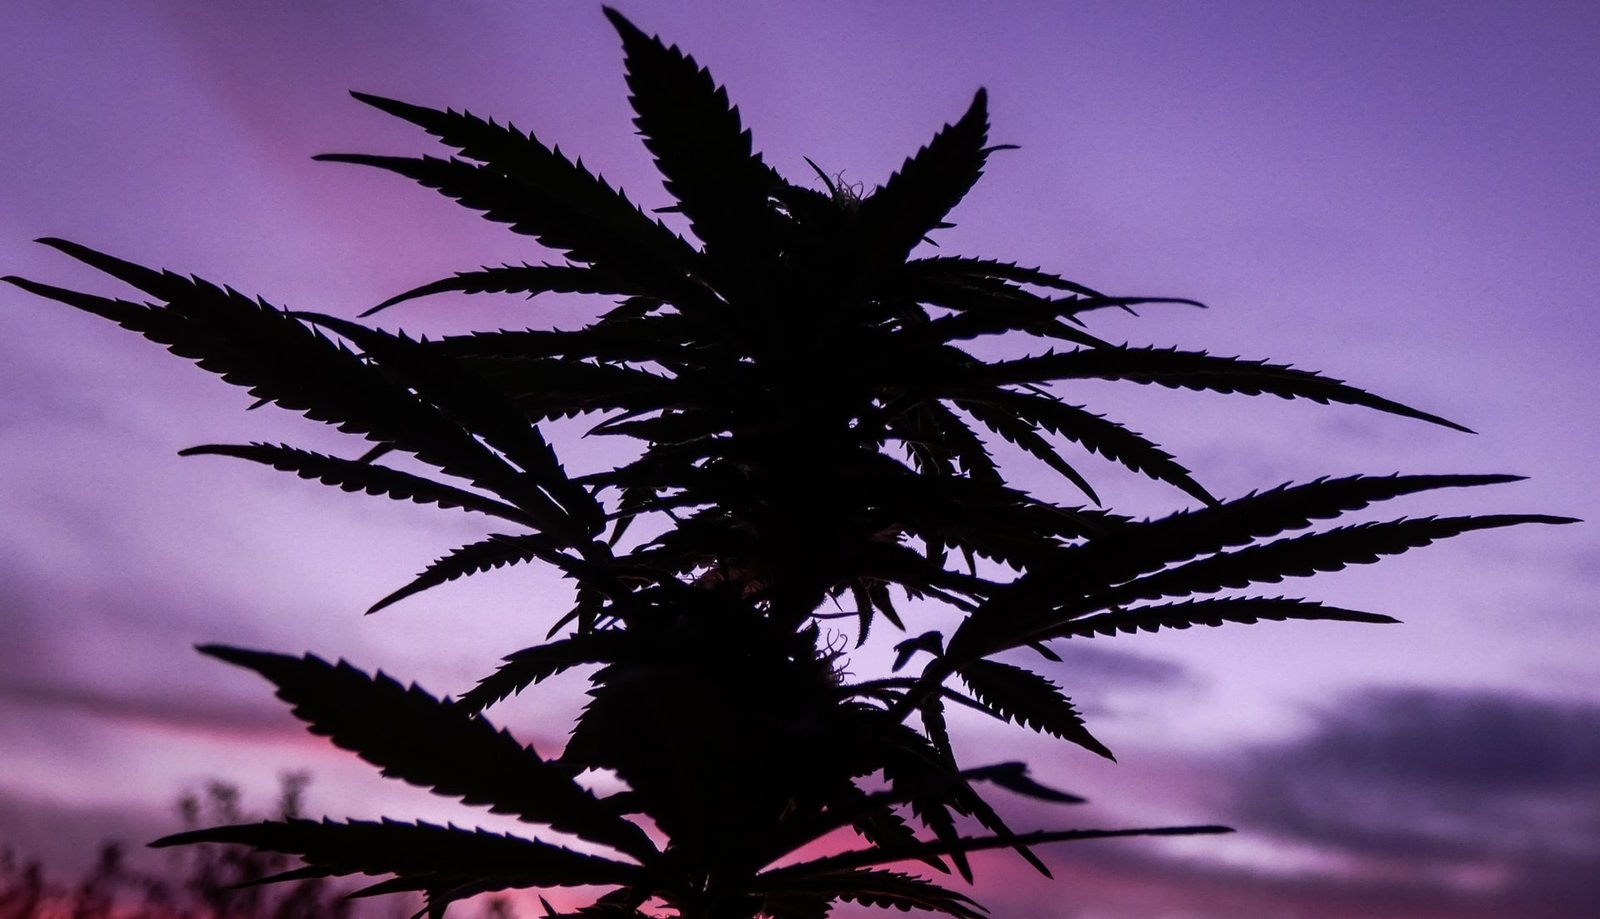 New Zealand Tourist Accommodation Revealed to be Previous Multi-Million Dollar Cannabis Site